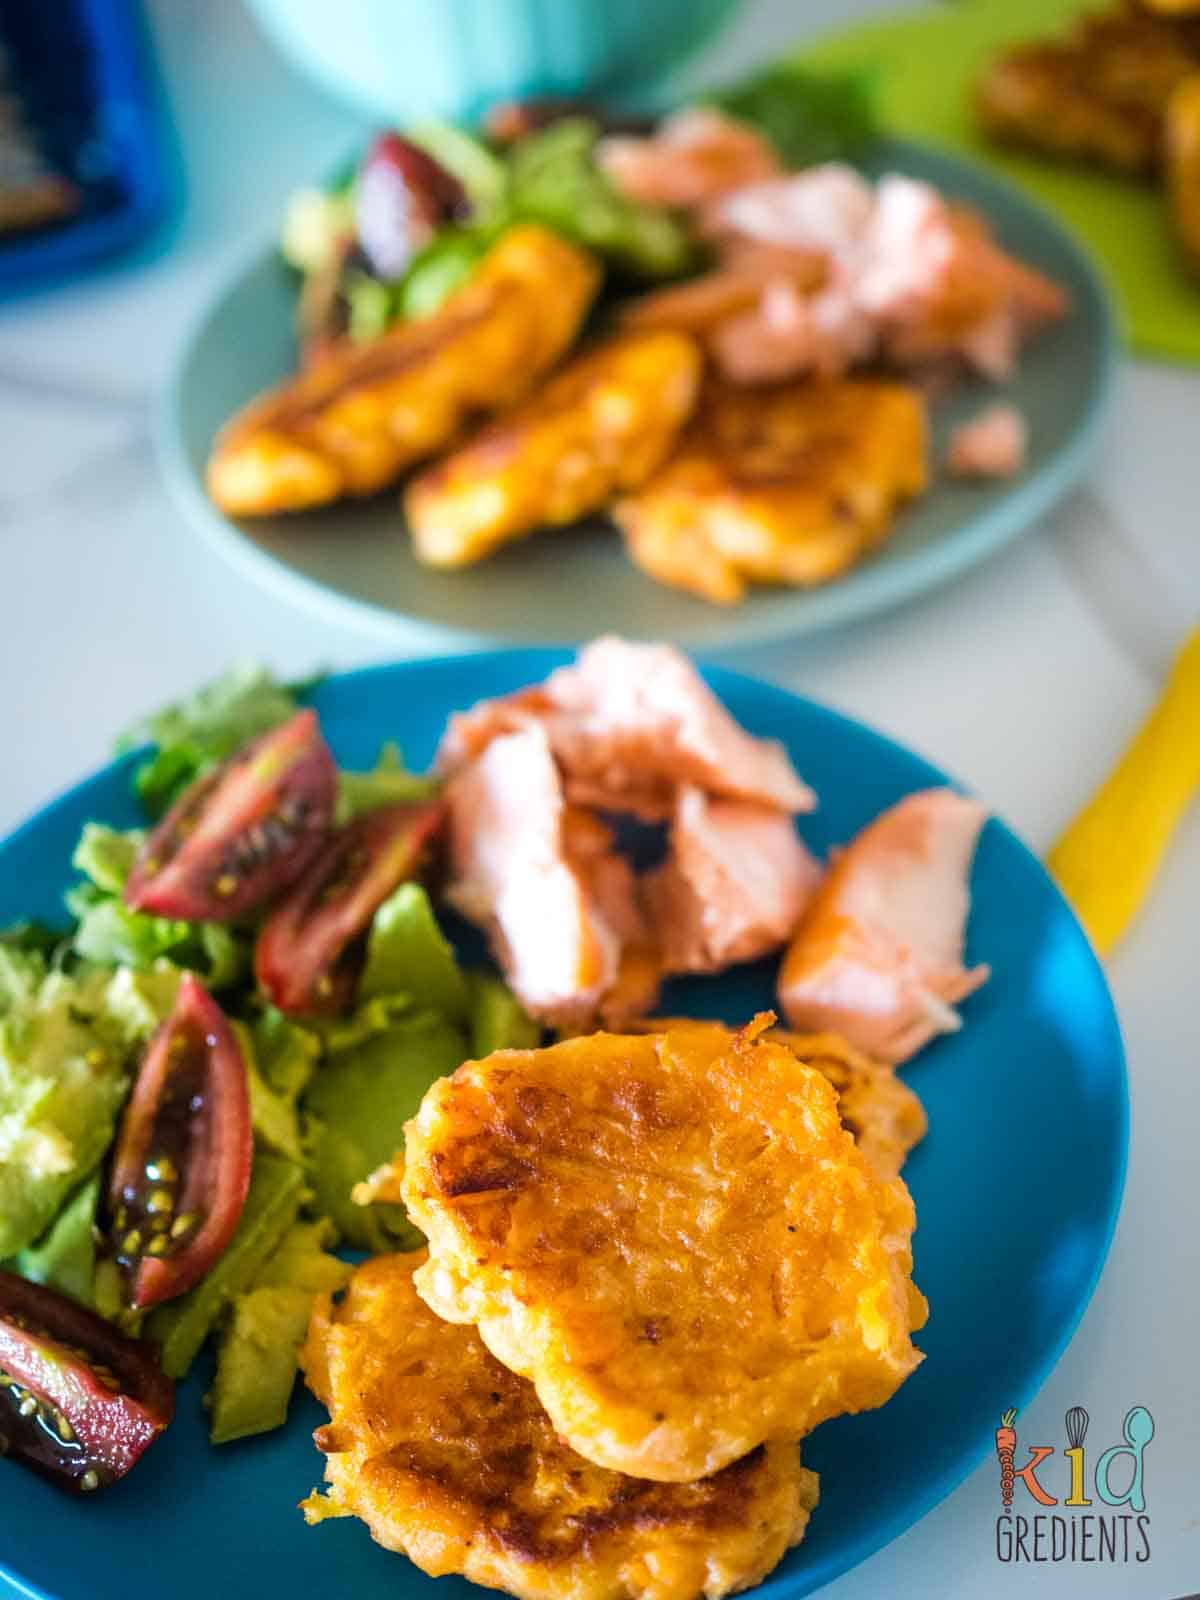 Sweet potato and apple fritters on a blue plate with salad.